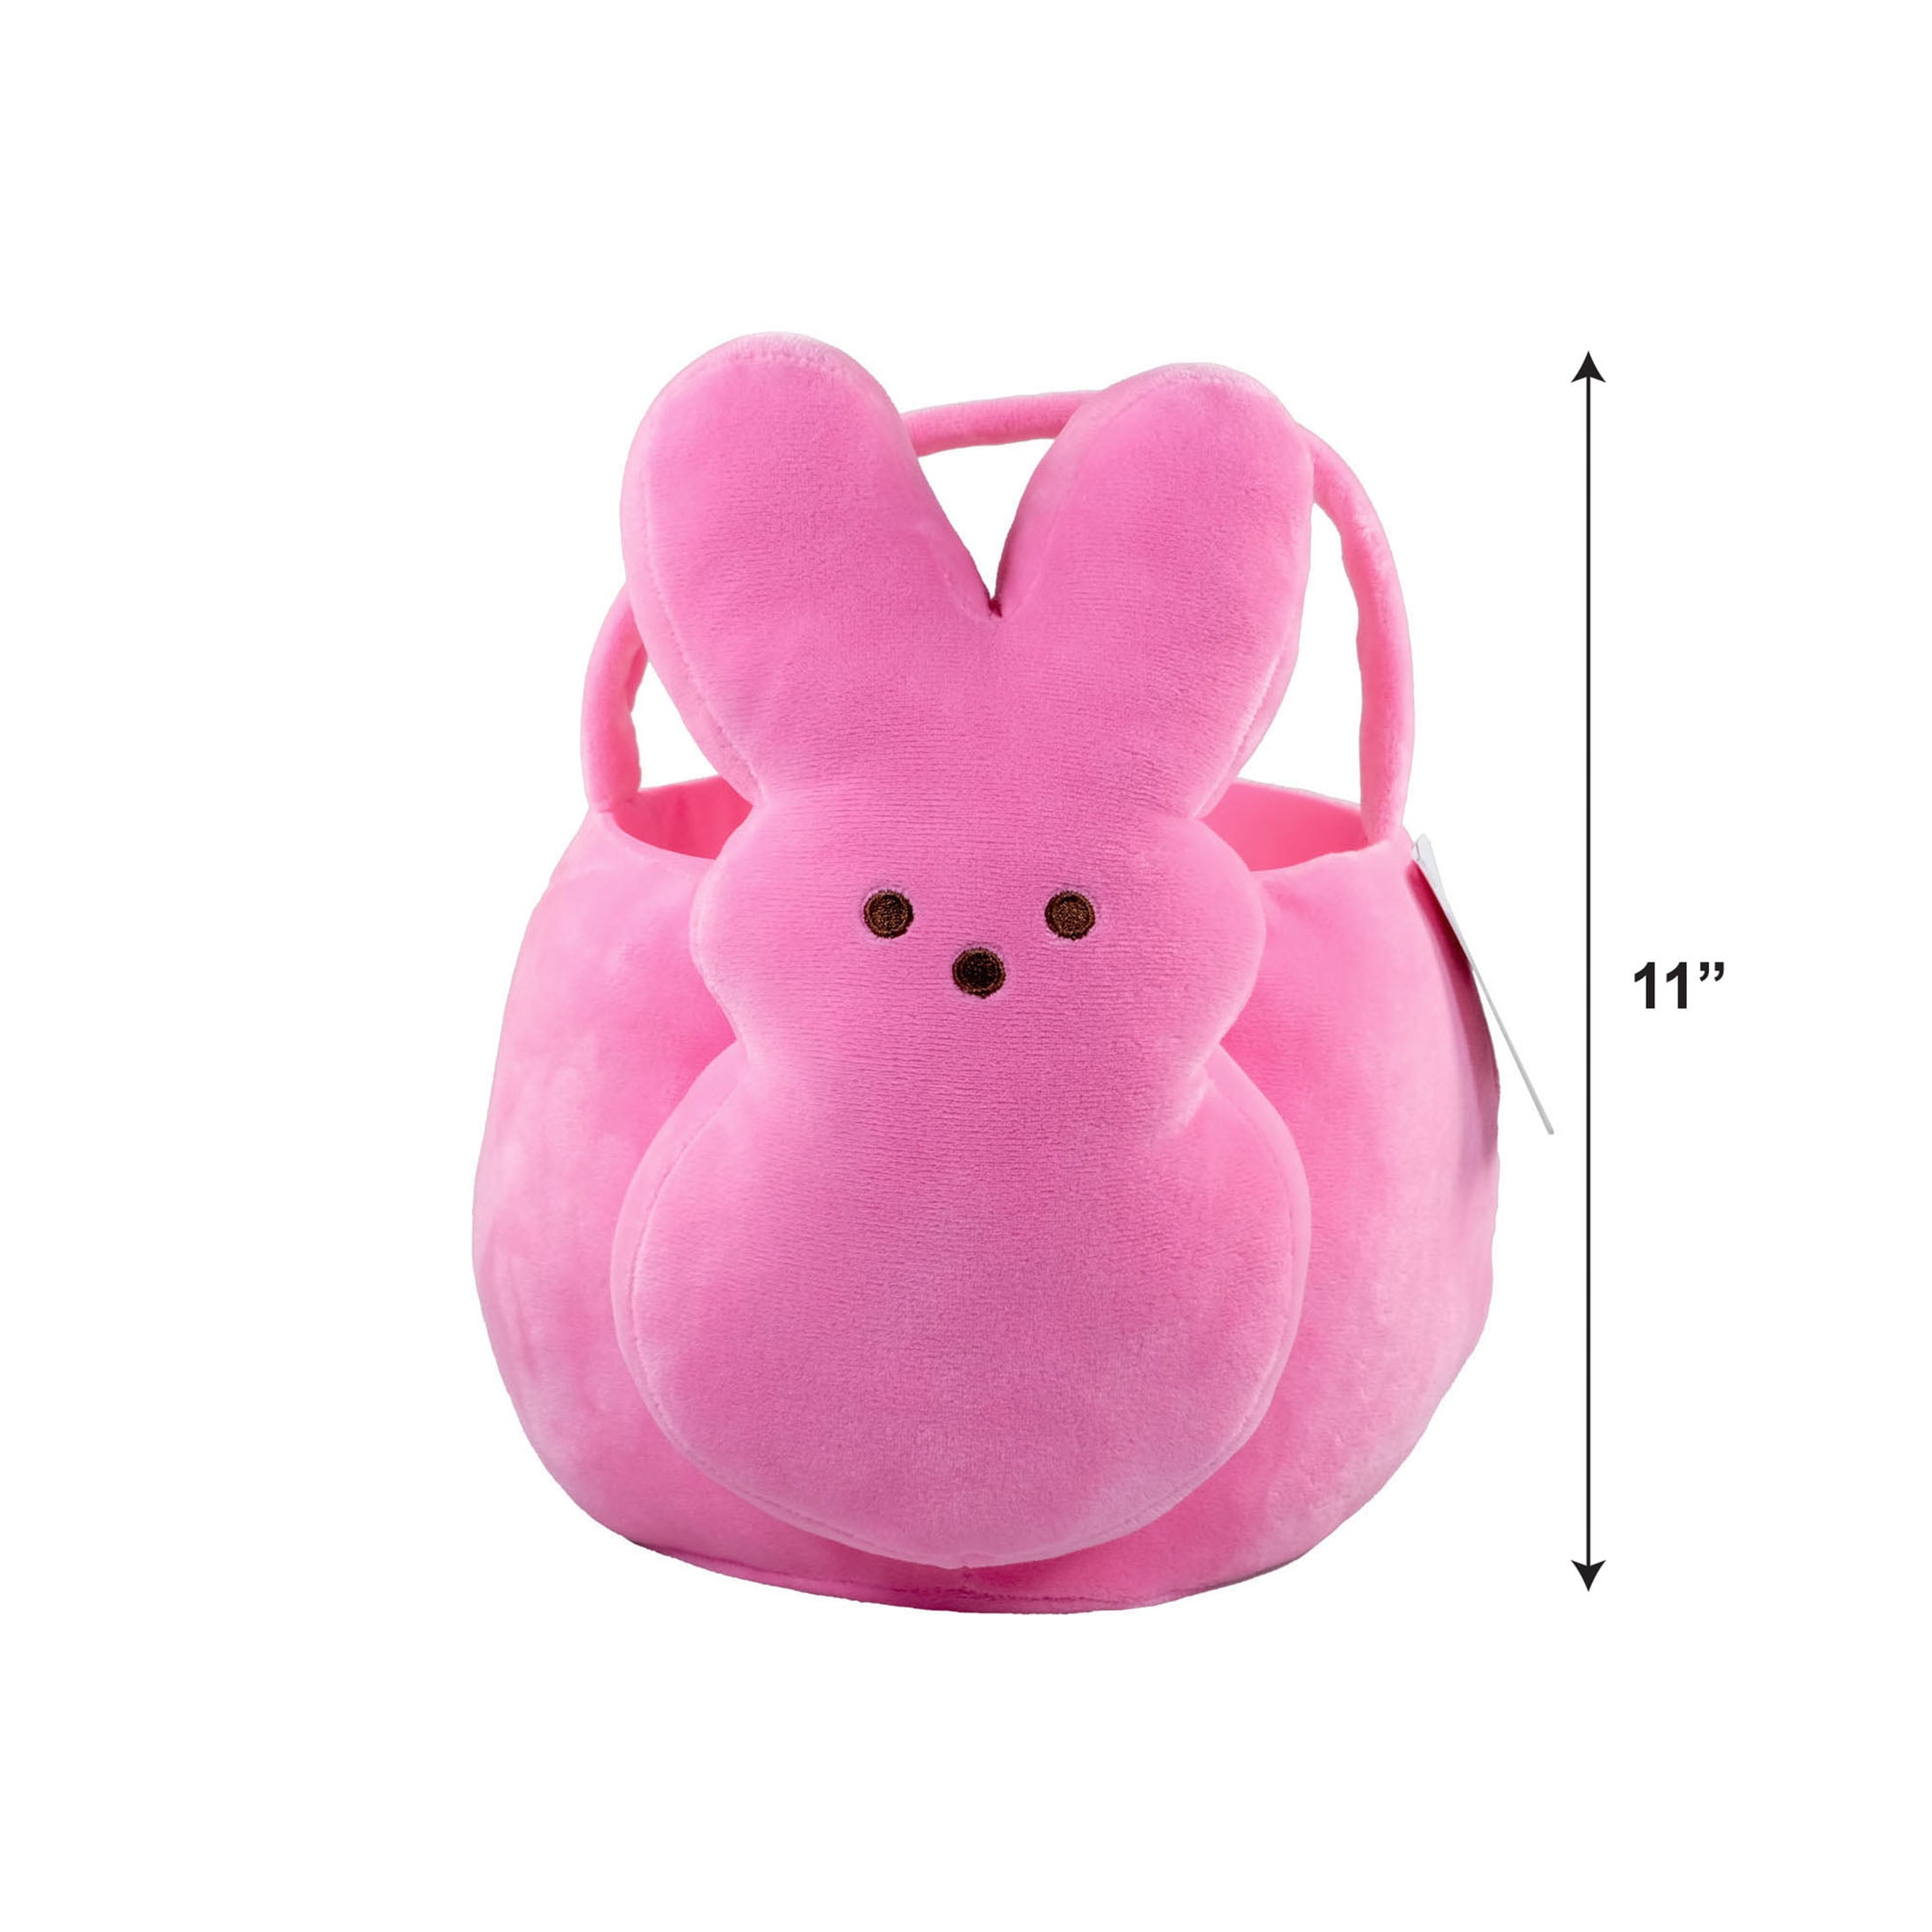 Peeps 6" Bubble Gum Scented Plush Bunny Rabbit EASTER BASKET FILLER GIFT Toy New 